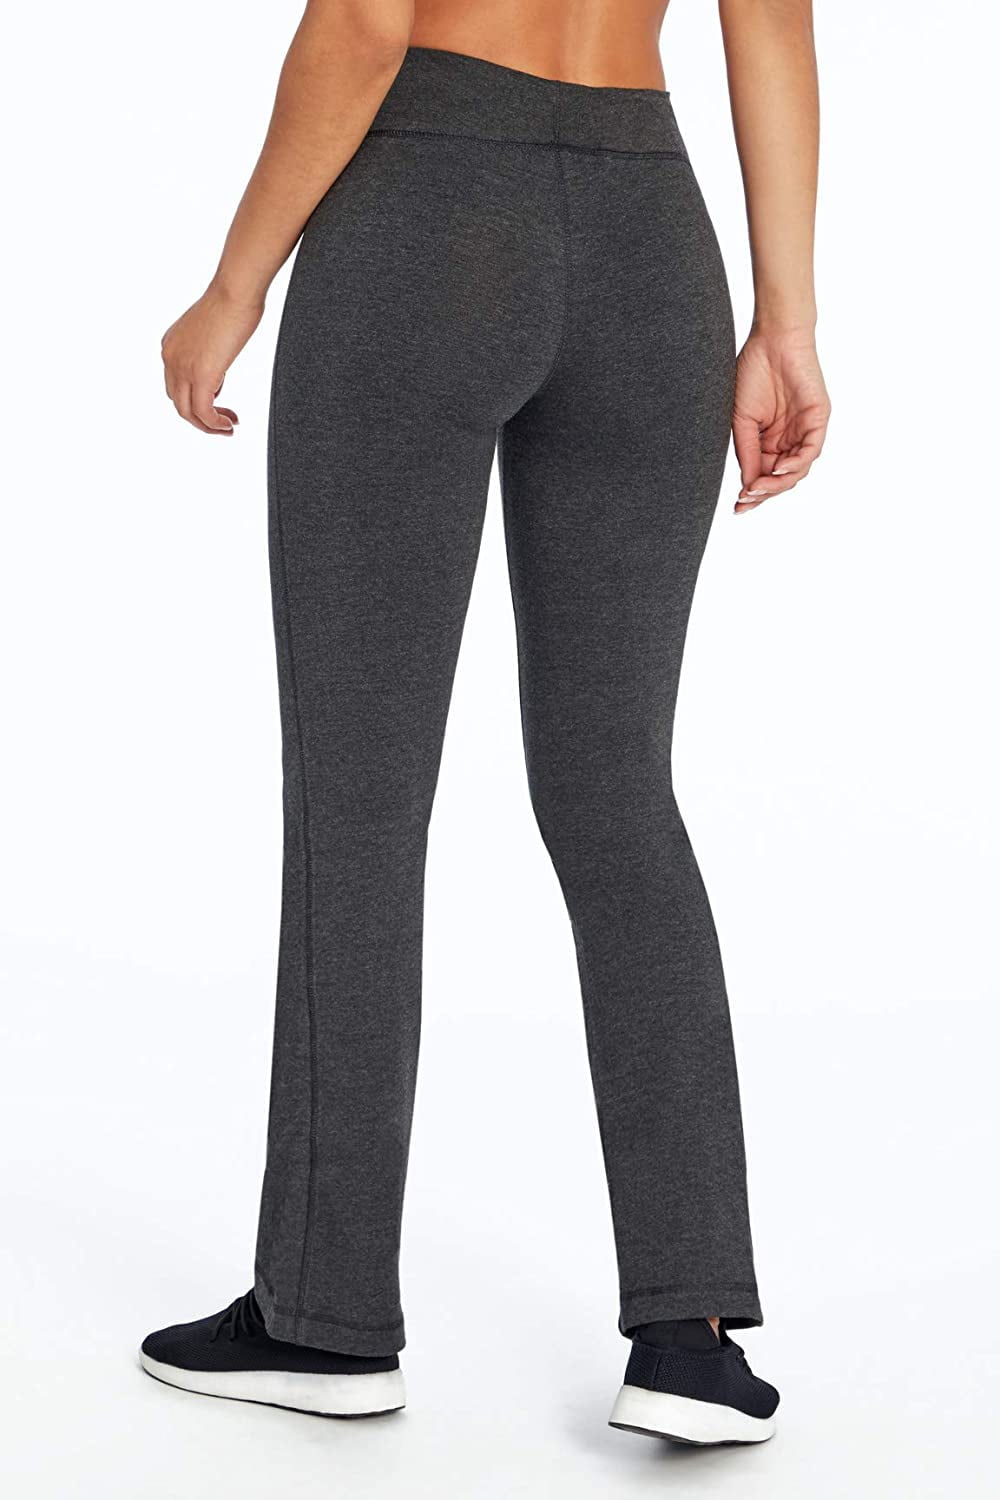 Bally Total Fitness Womens Active Tummy Control Pant  Walmartcom